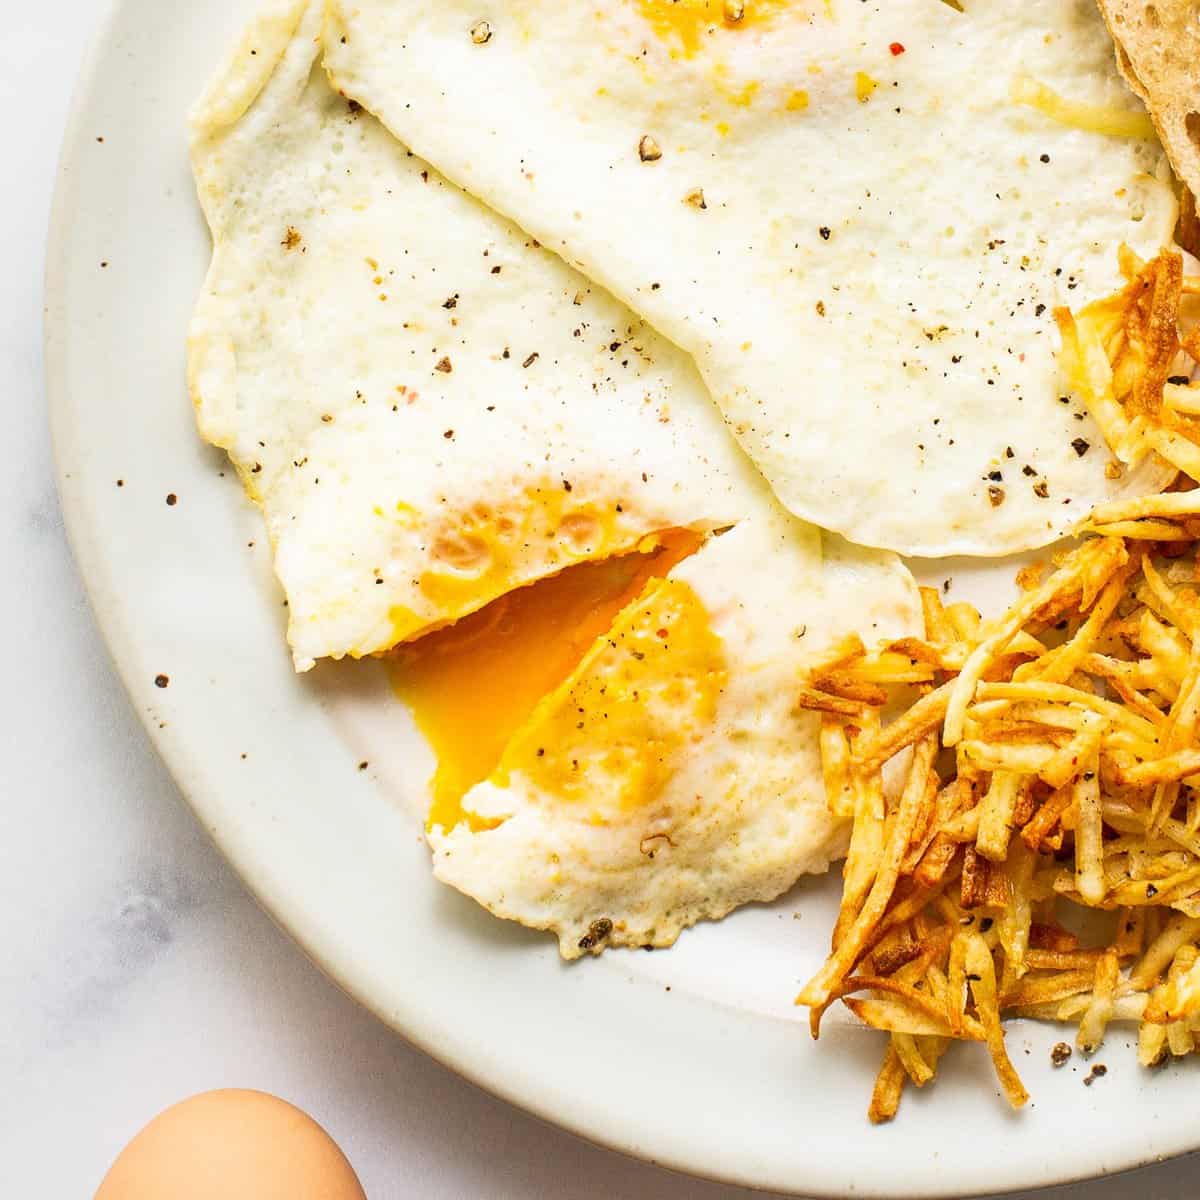 https://fitfoodiefinds.com/wp-content/uploads/2022/05/Over-Medium-Eggs-sq.jpg